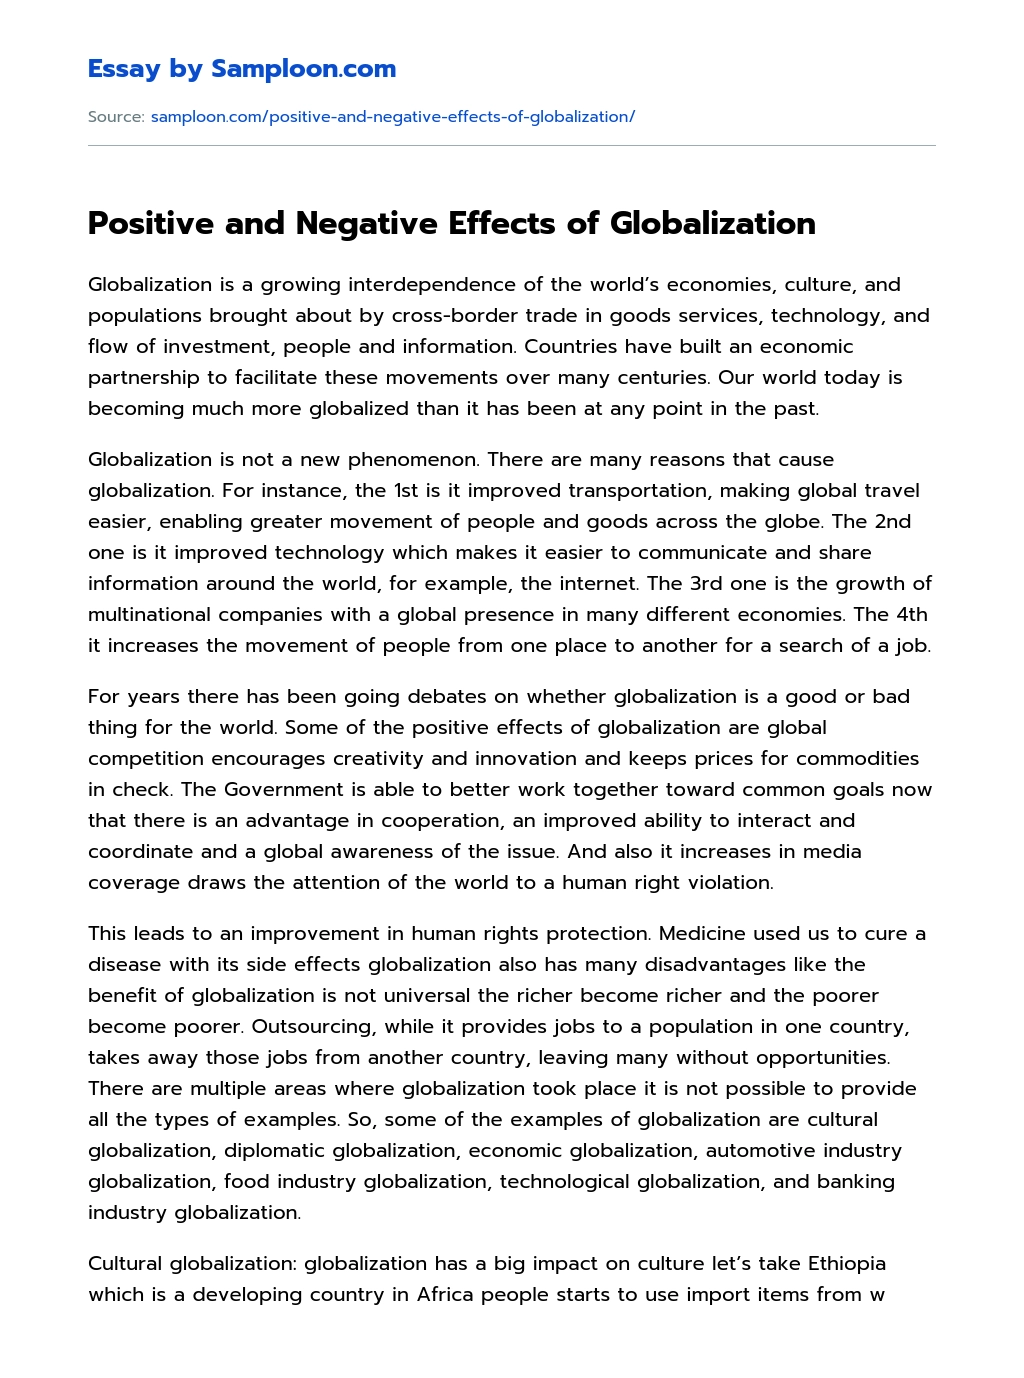 Positive and Negative Effects of Globalization essay